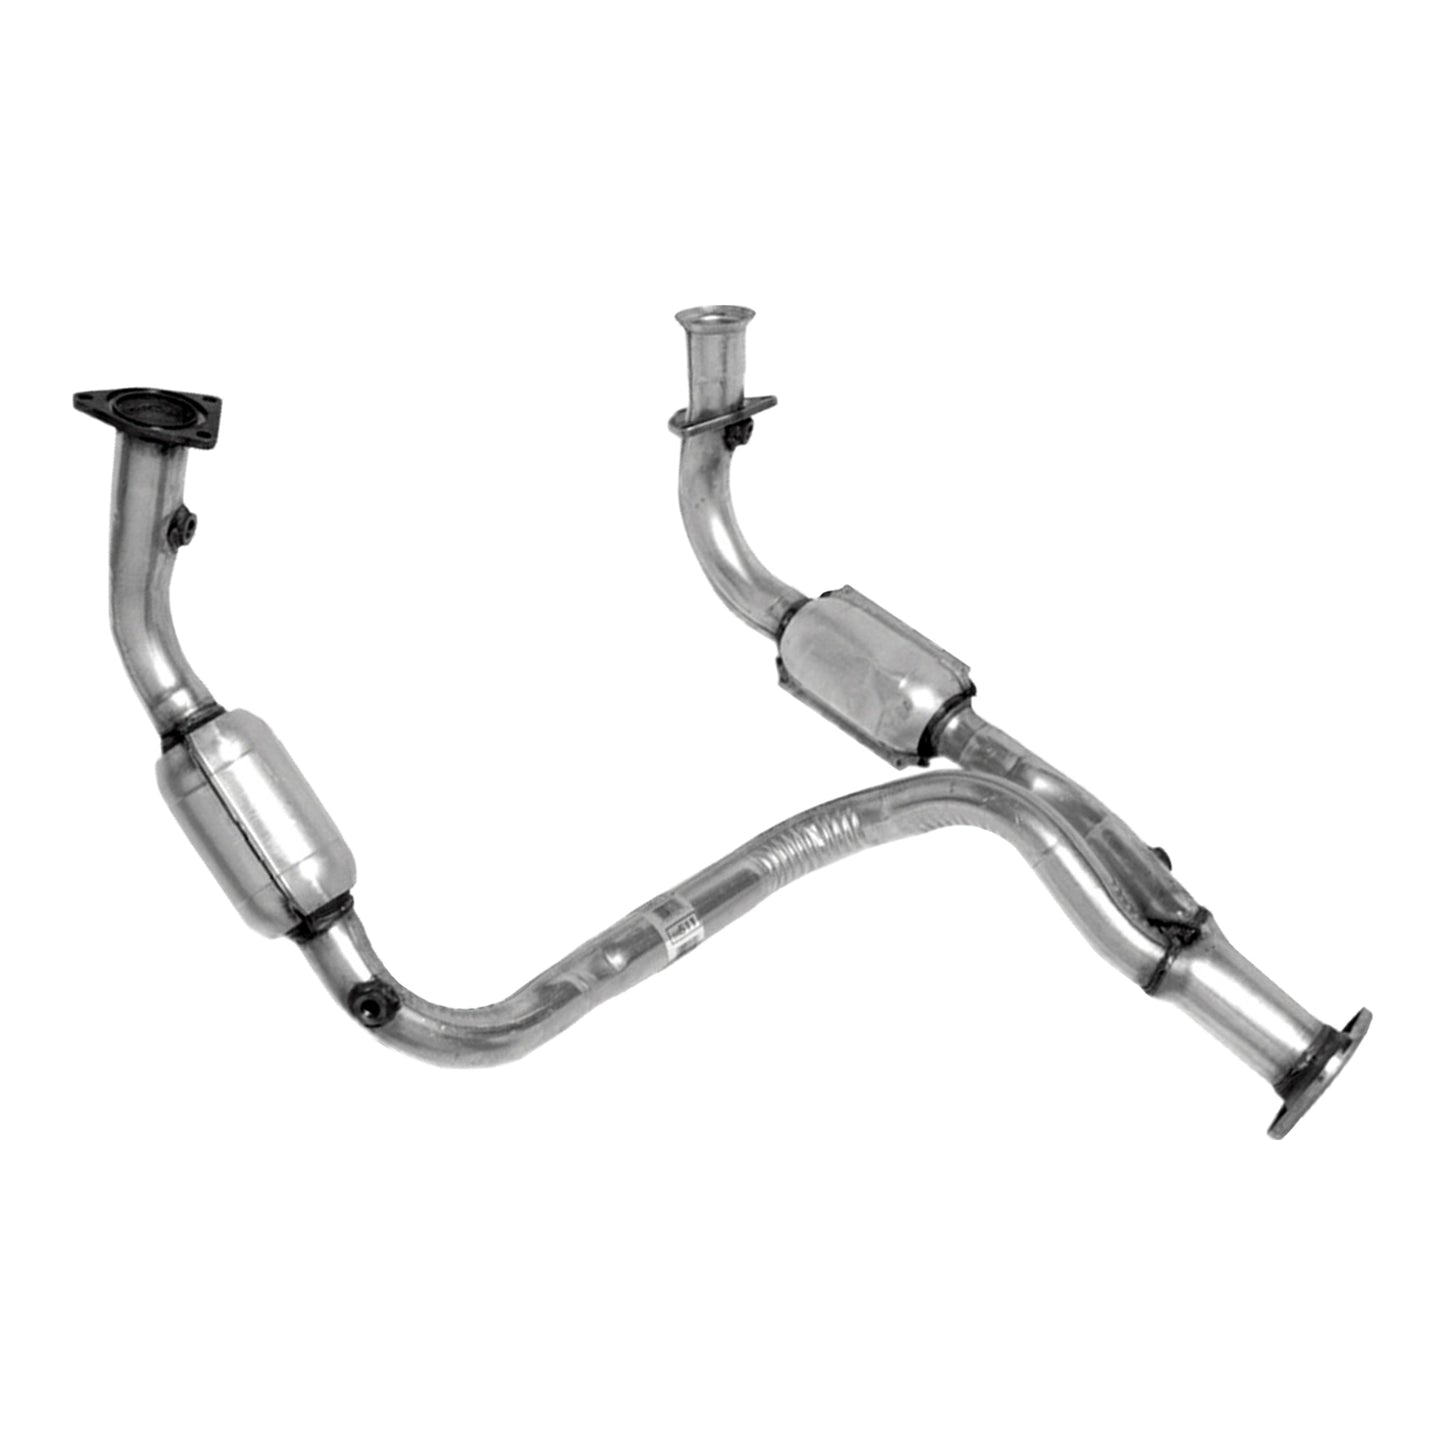 213012 Direct Fit Catalytic Converter Y-Pipe Front Manifold for Chevy GMC C1500